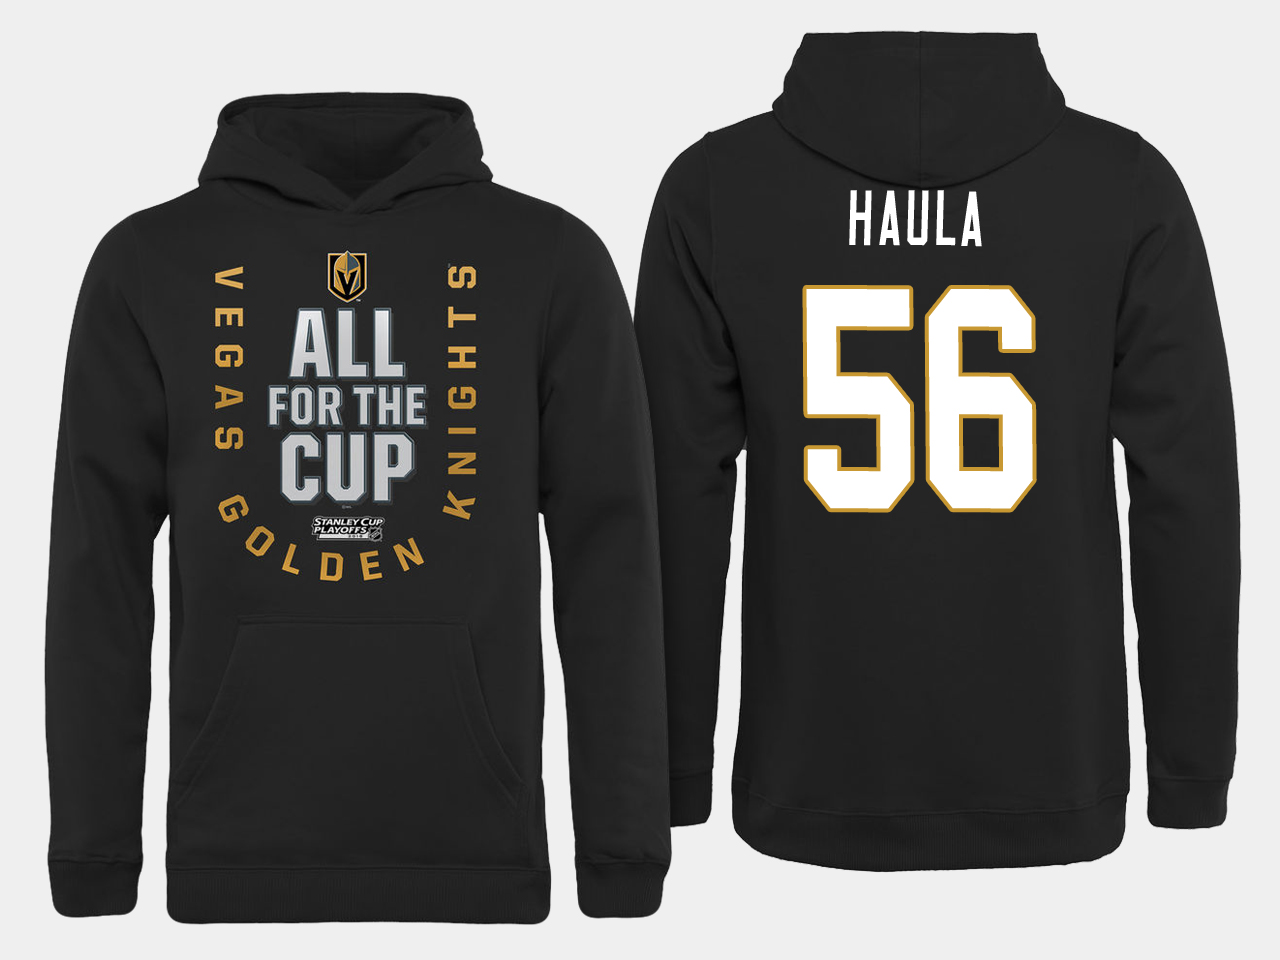 Men NHL Vegas Golden Knights #56 Haula All for the Cup hoodie->more nhl jerseys->NHL Jersey